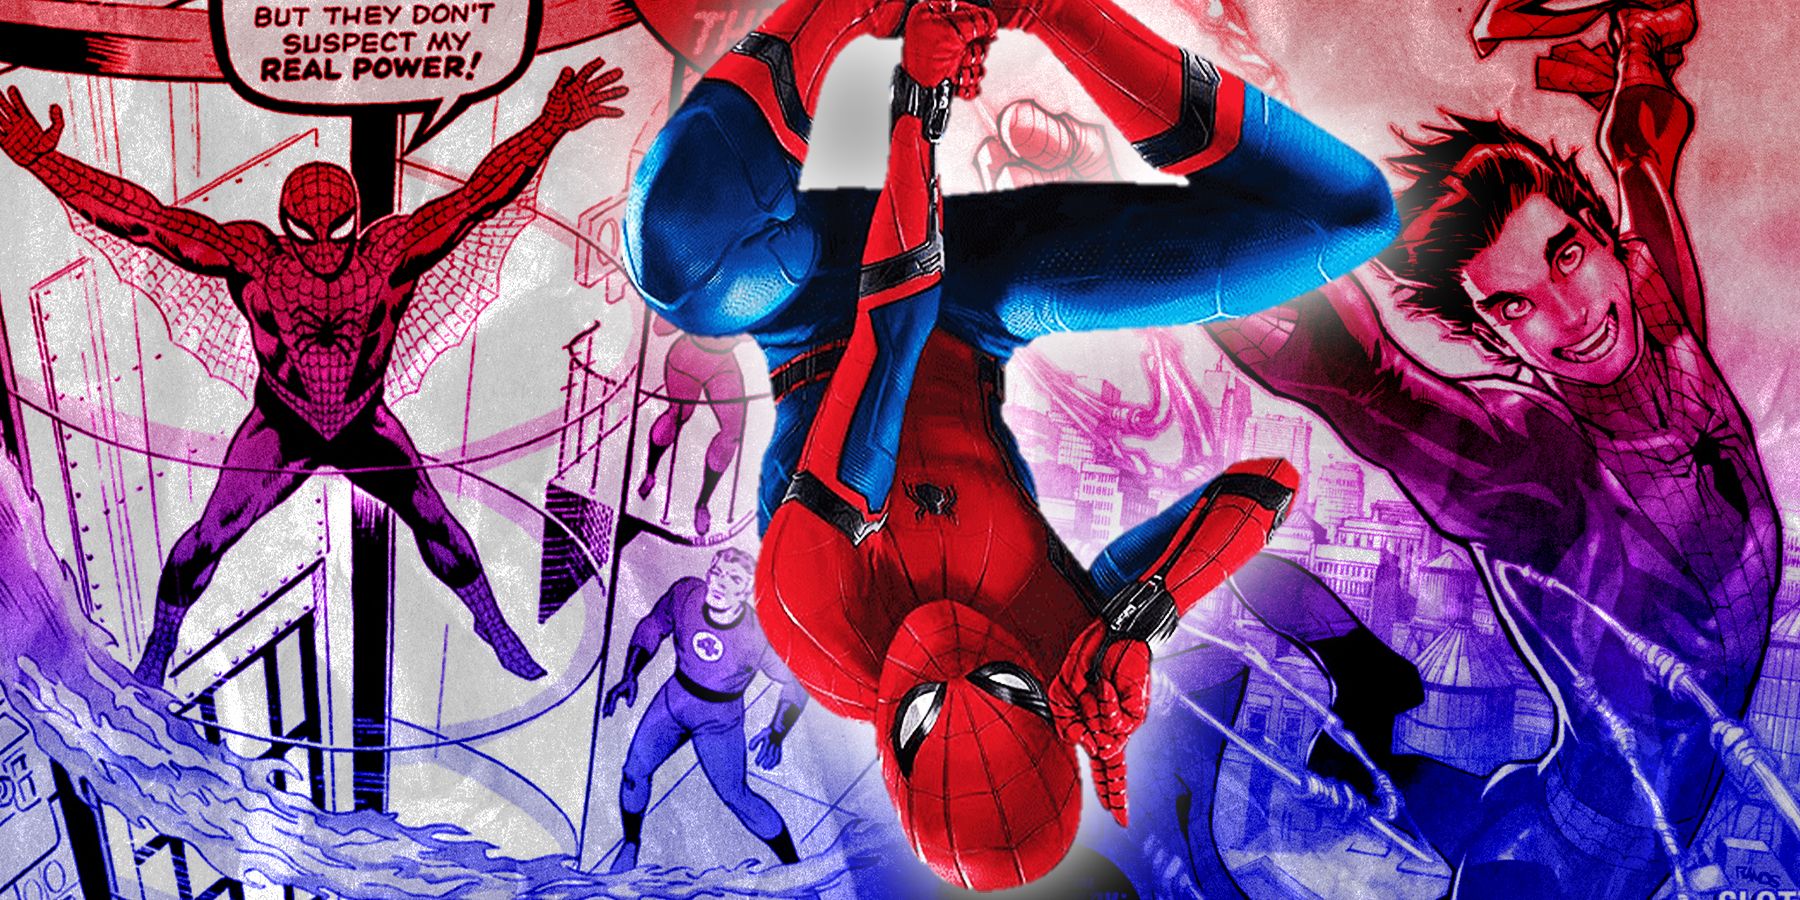 Blended image of Spider-Man in The Amazing Spider-Man #1; Tom Holland's Spider-Man upside-down; and Spider-Man swinging through the air